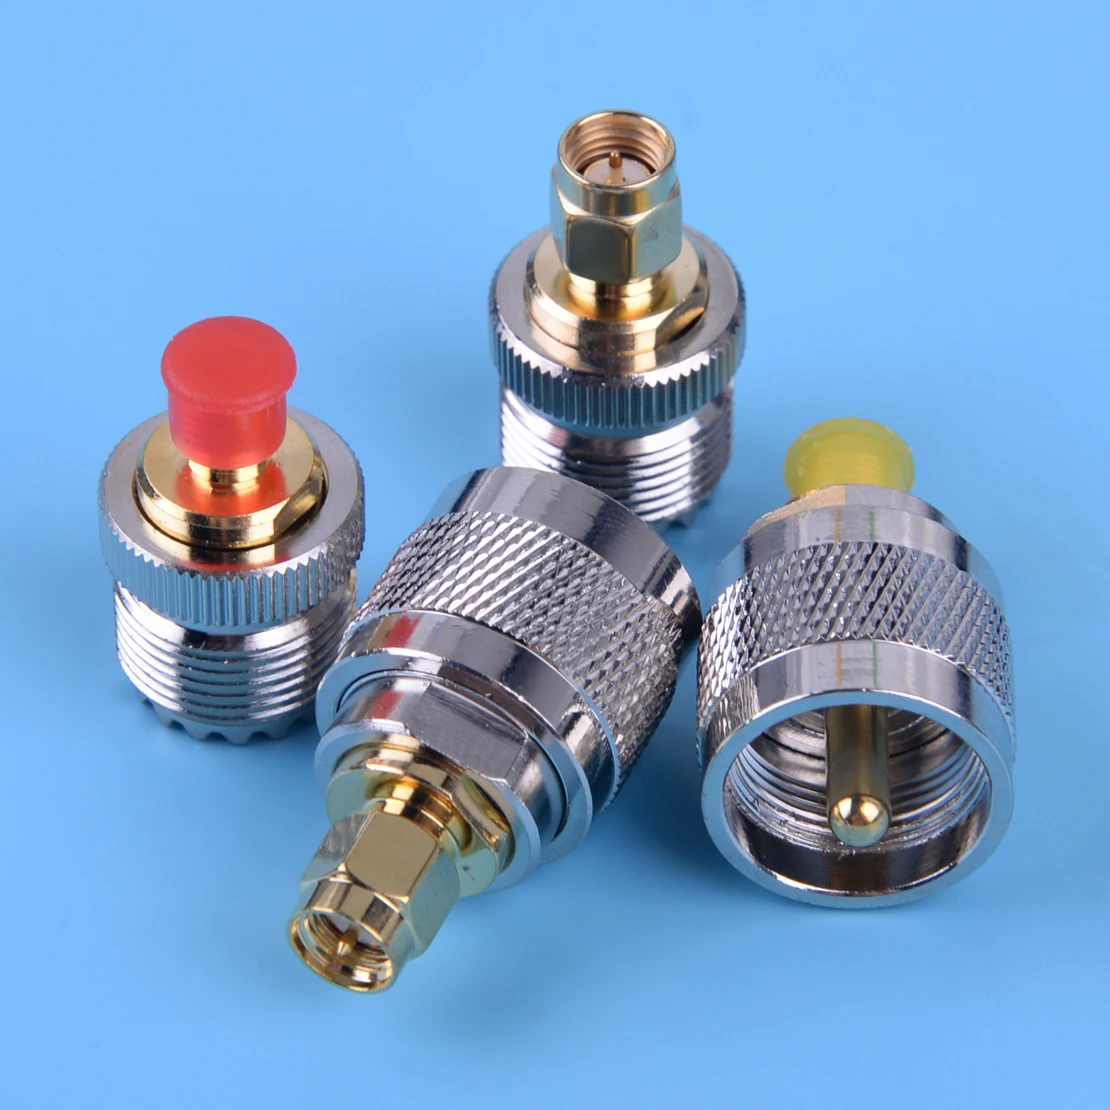 

LETAOSK 4pcs Adapter Kit PL259 SO239 to SMA Male Female RF Connector Coax Coaxial Test Converter Tool